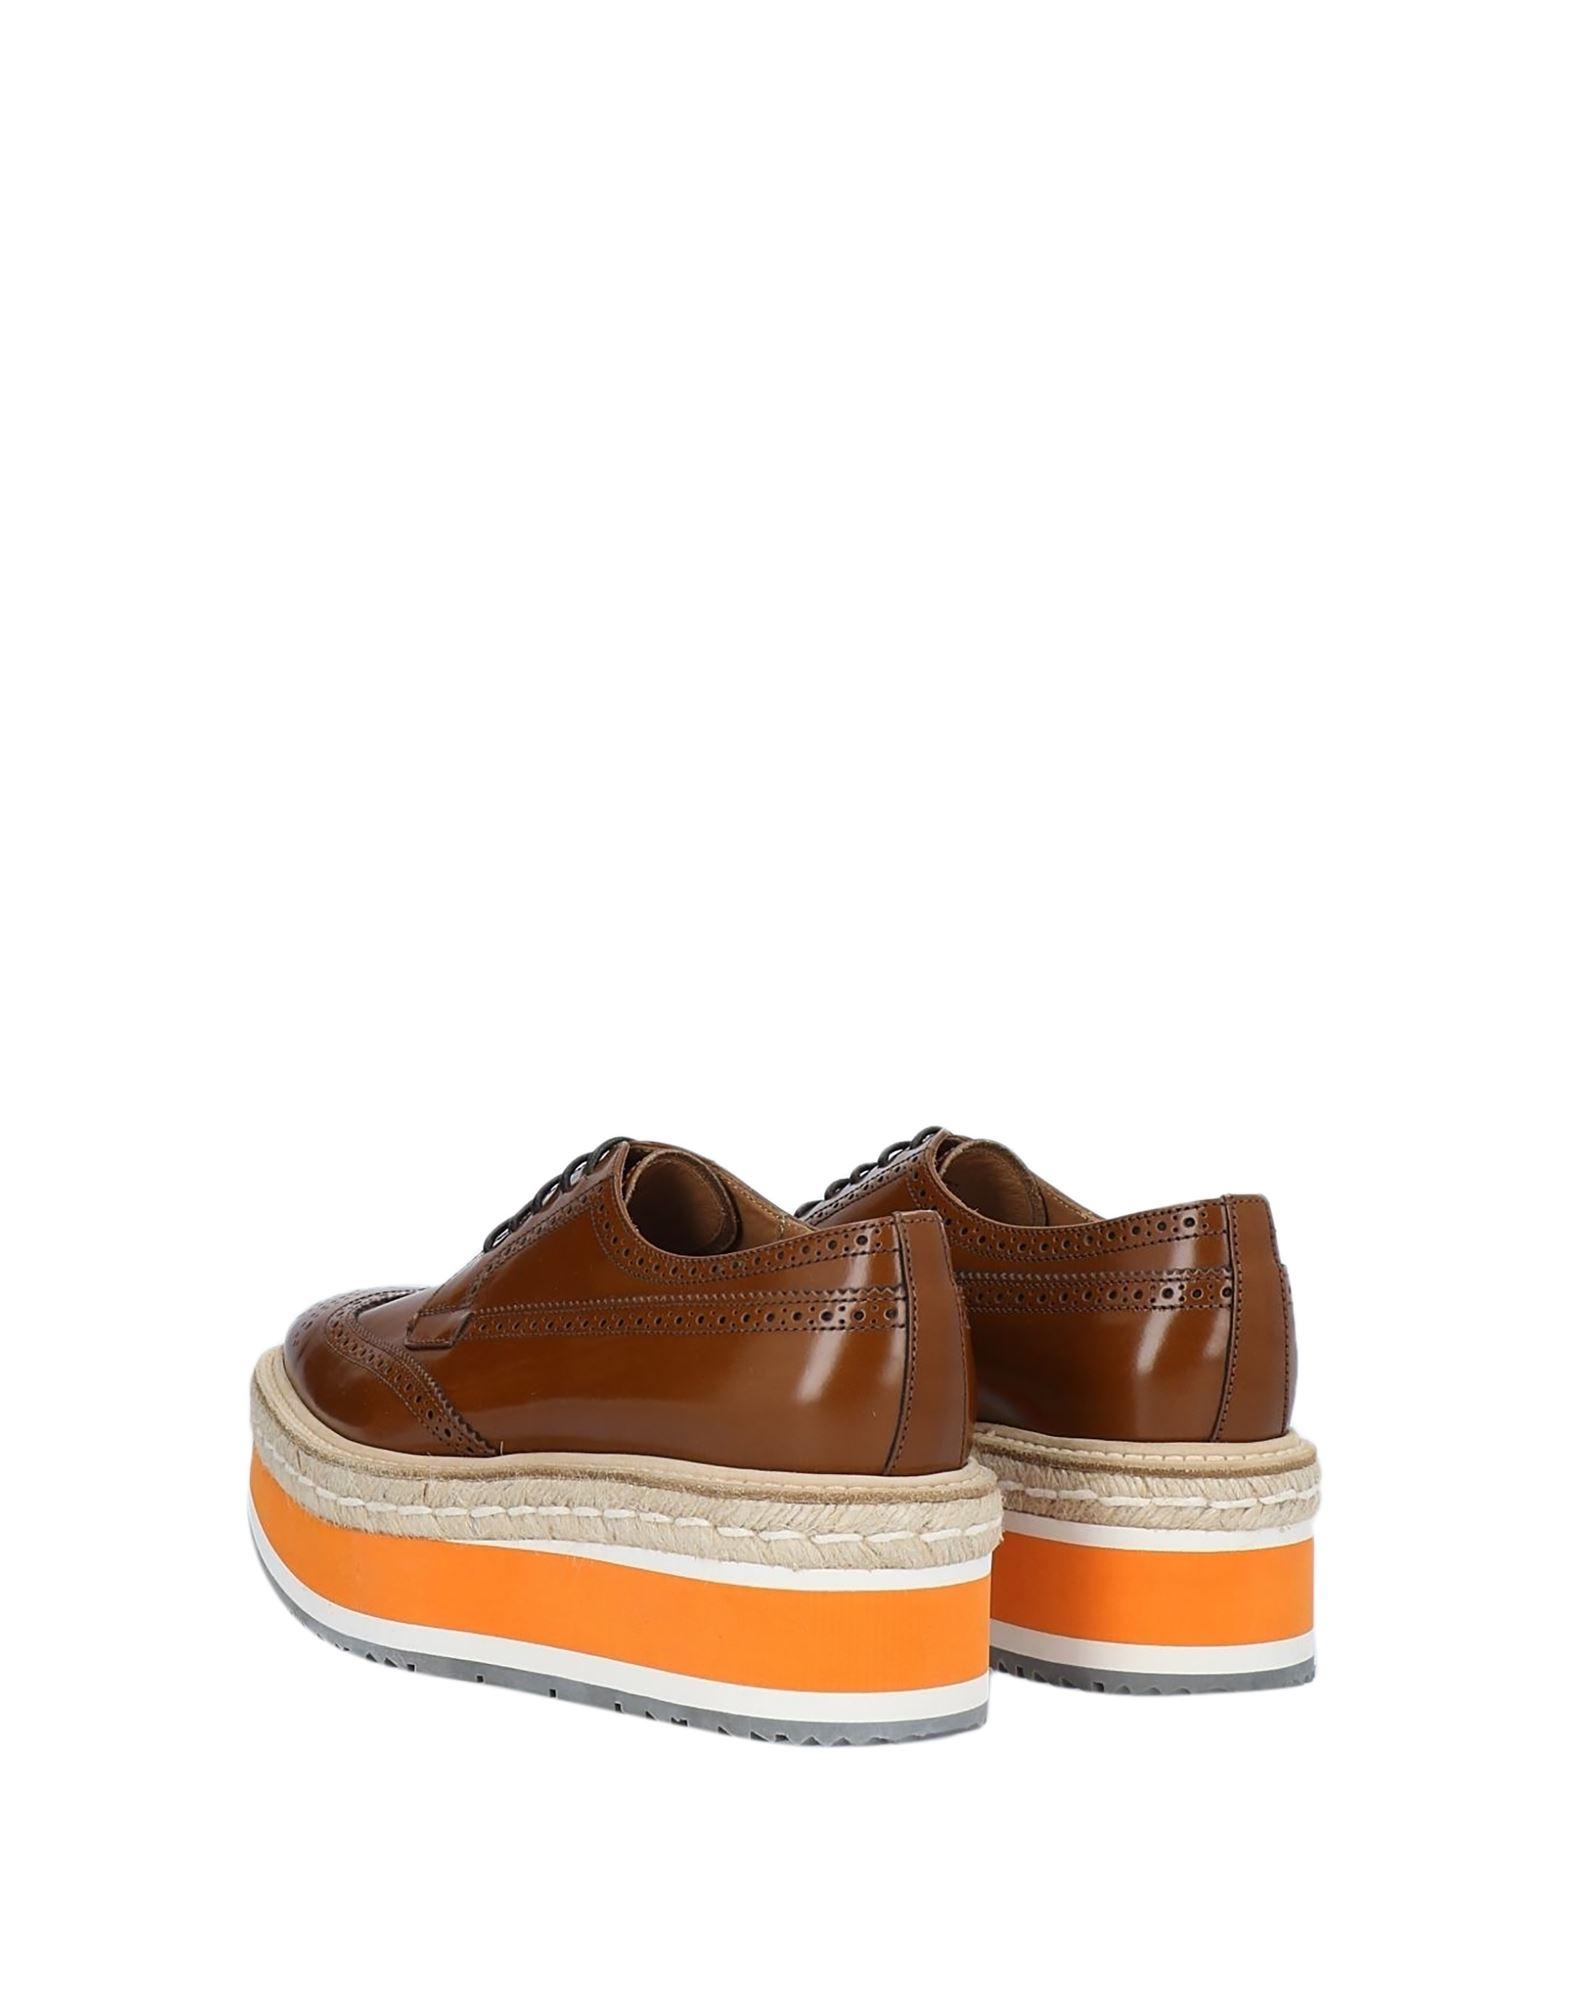 Prada Lace-up Shoes in Brown | Lyst